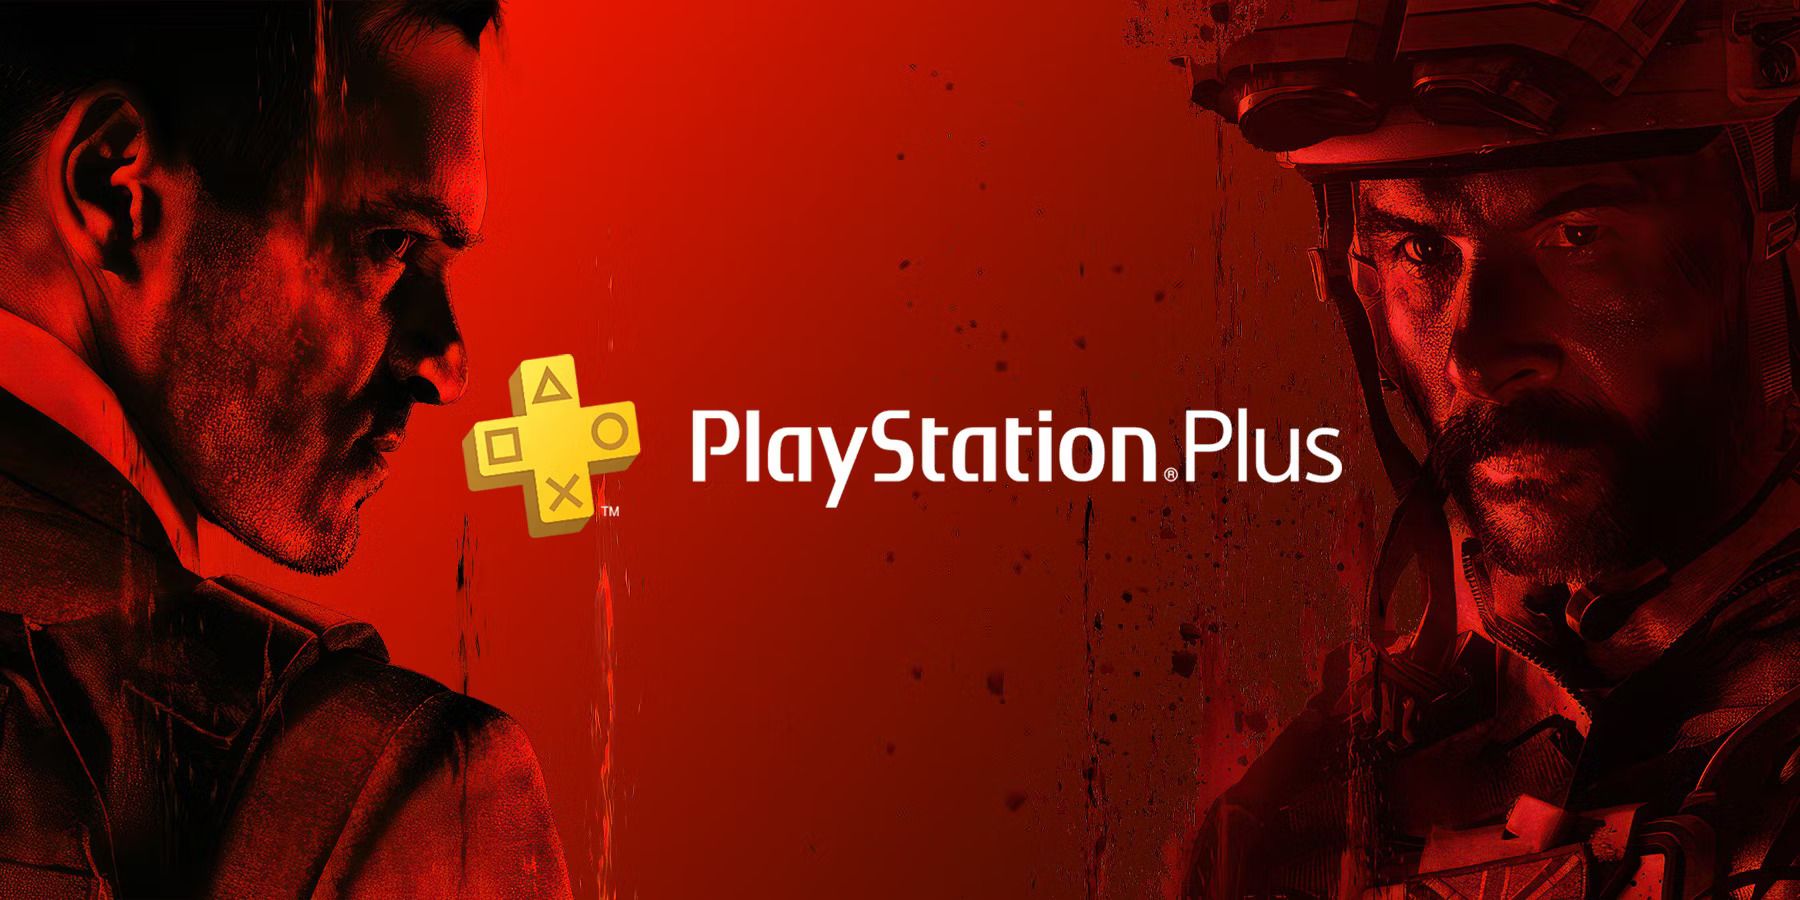 ps plus logo with call of duty characters